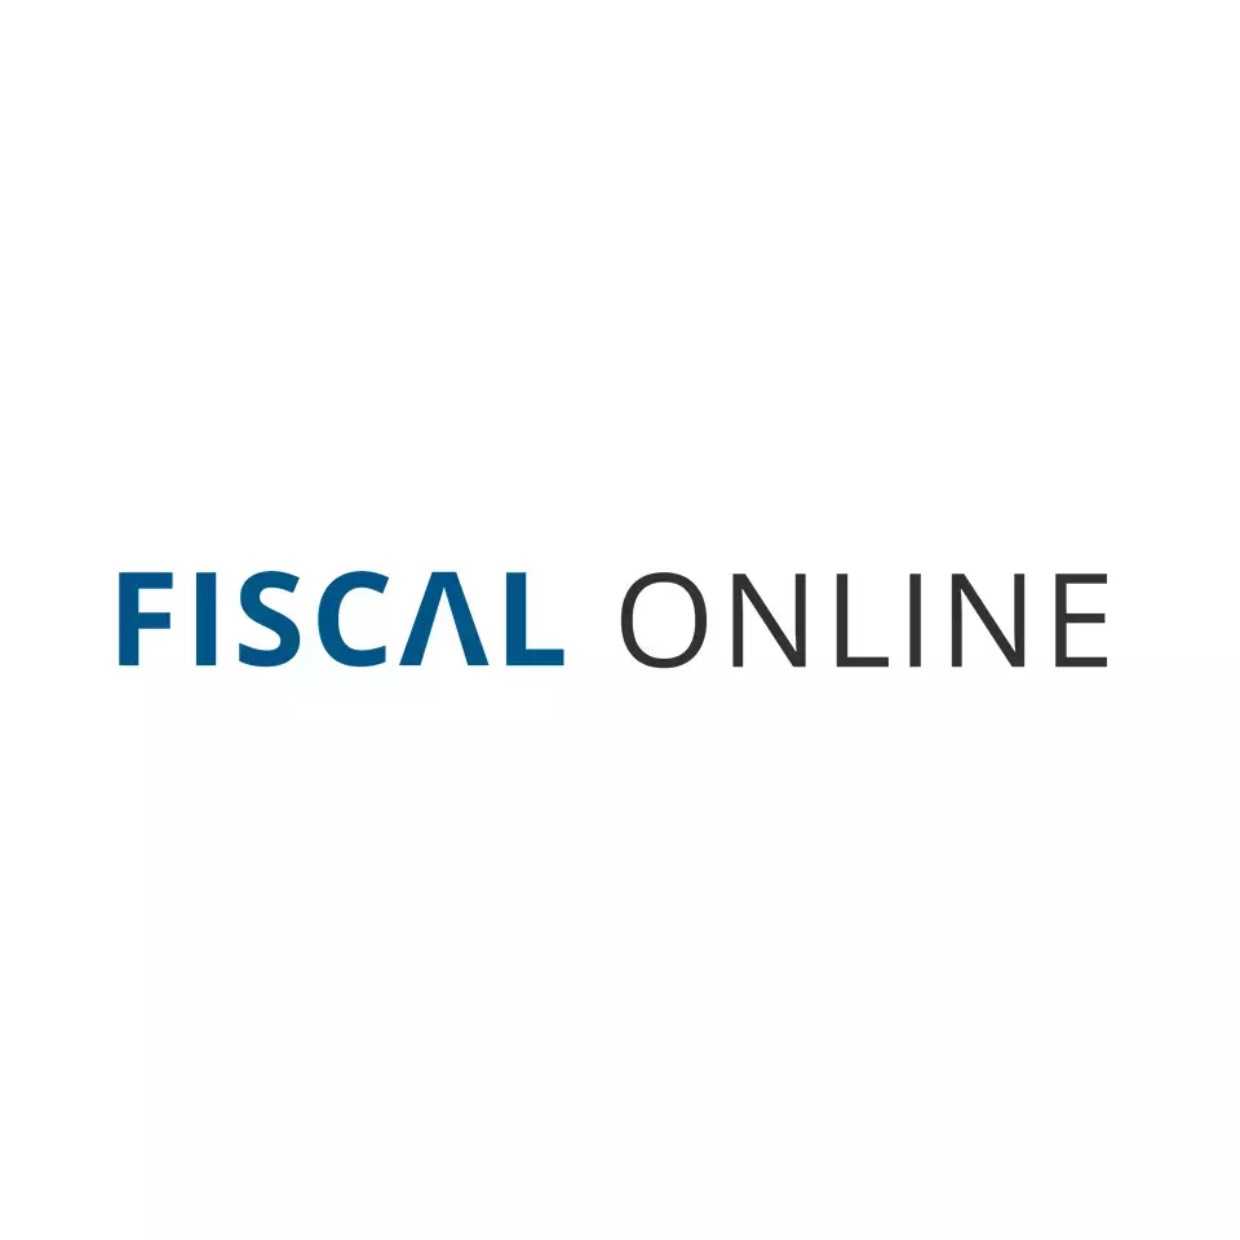 Fiscal Online